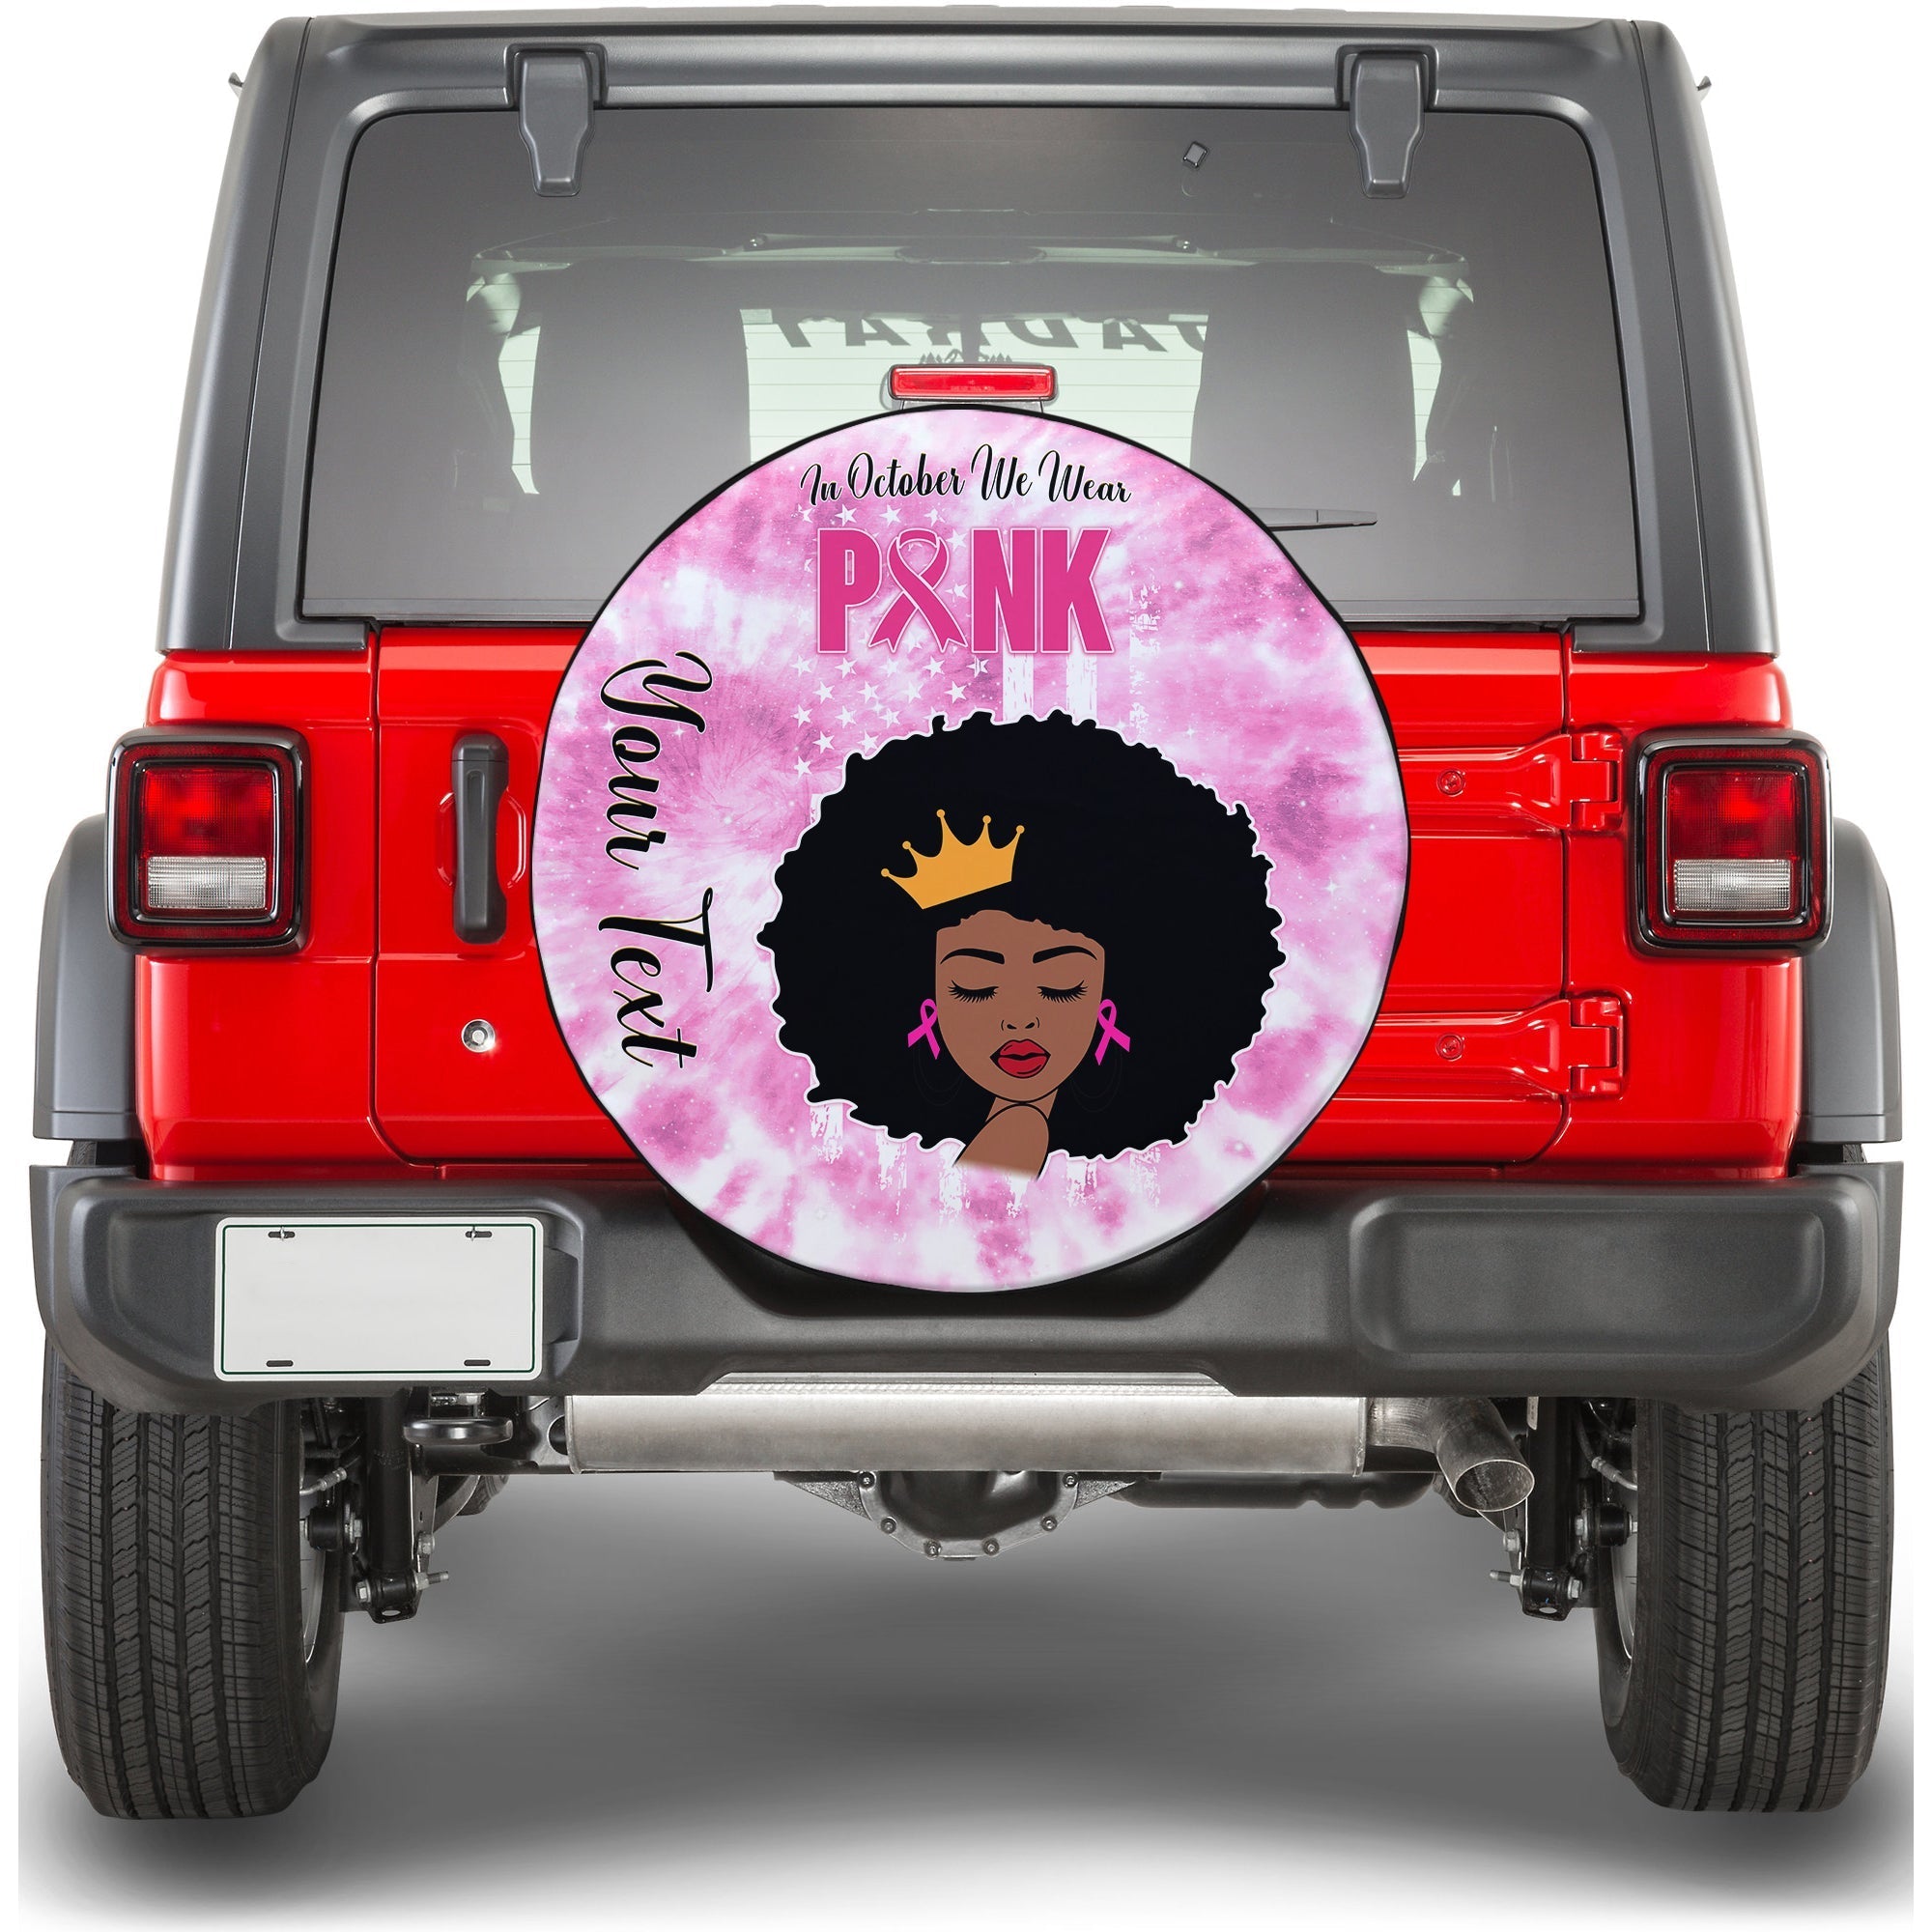 custom-personalised-breast-cancer-spare-tire-cover-tie-dye-in-october-we-wear-pink-black-women